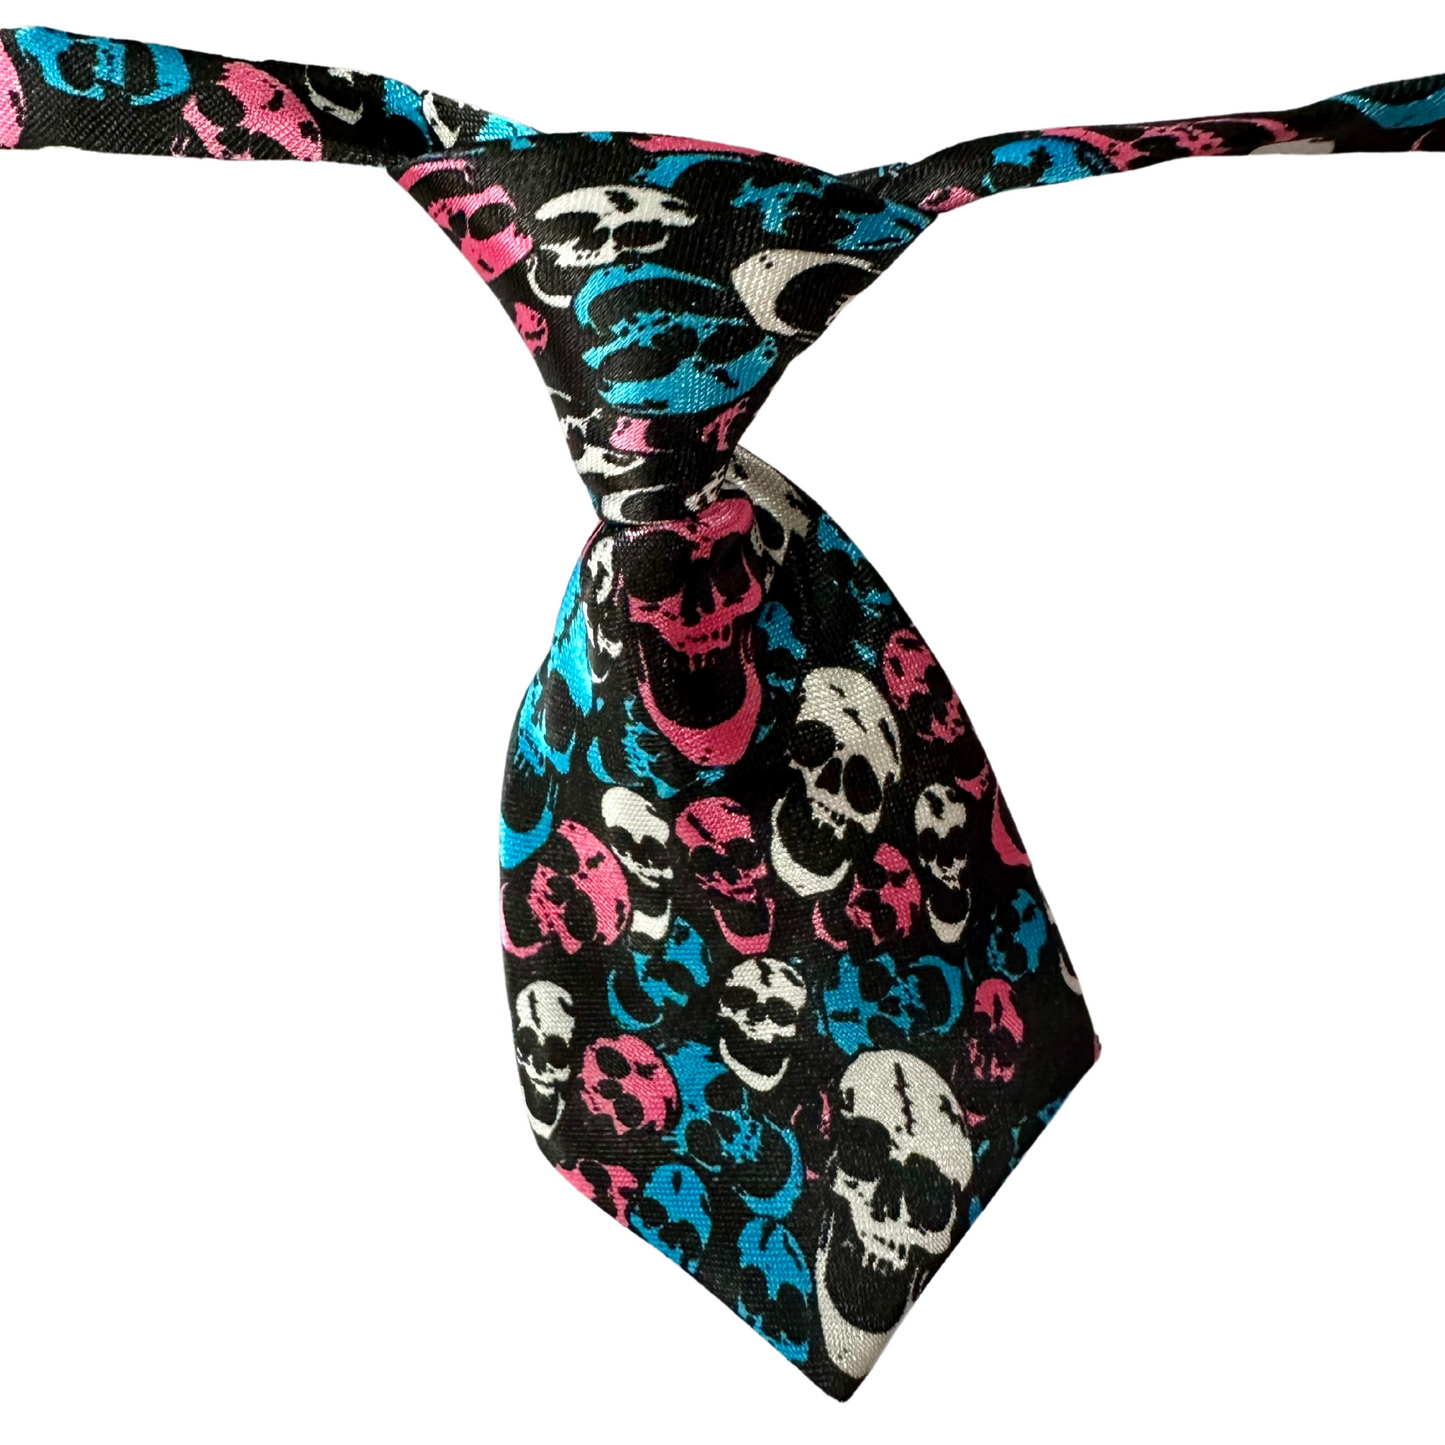 Silky Adjustable Business Tie | Dogs and Cats | Pink white Stripe